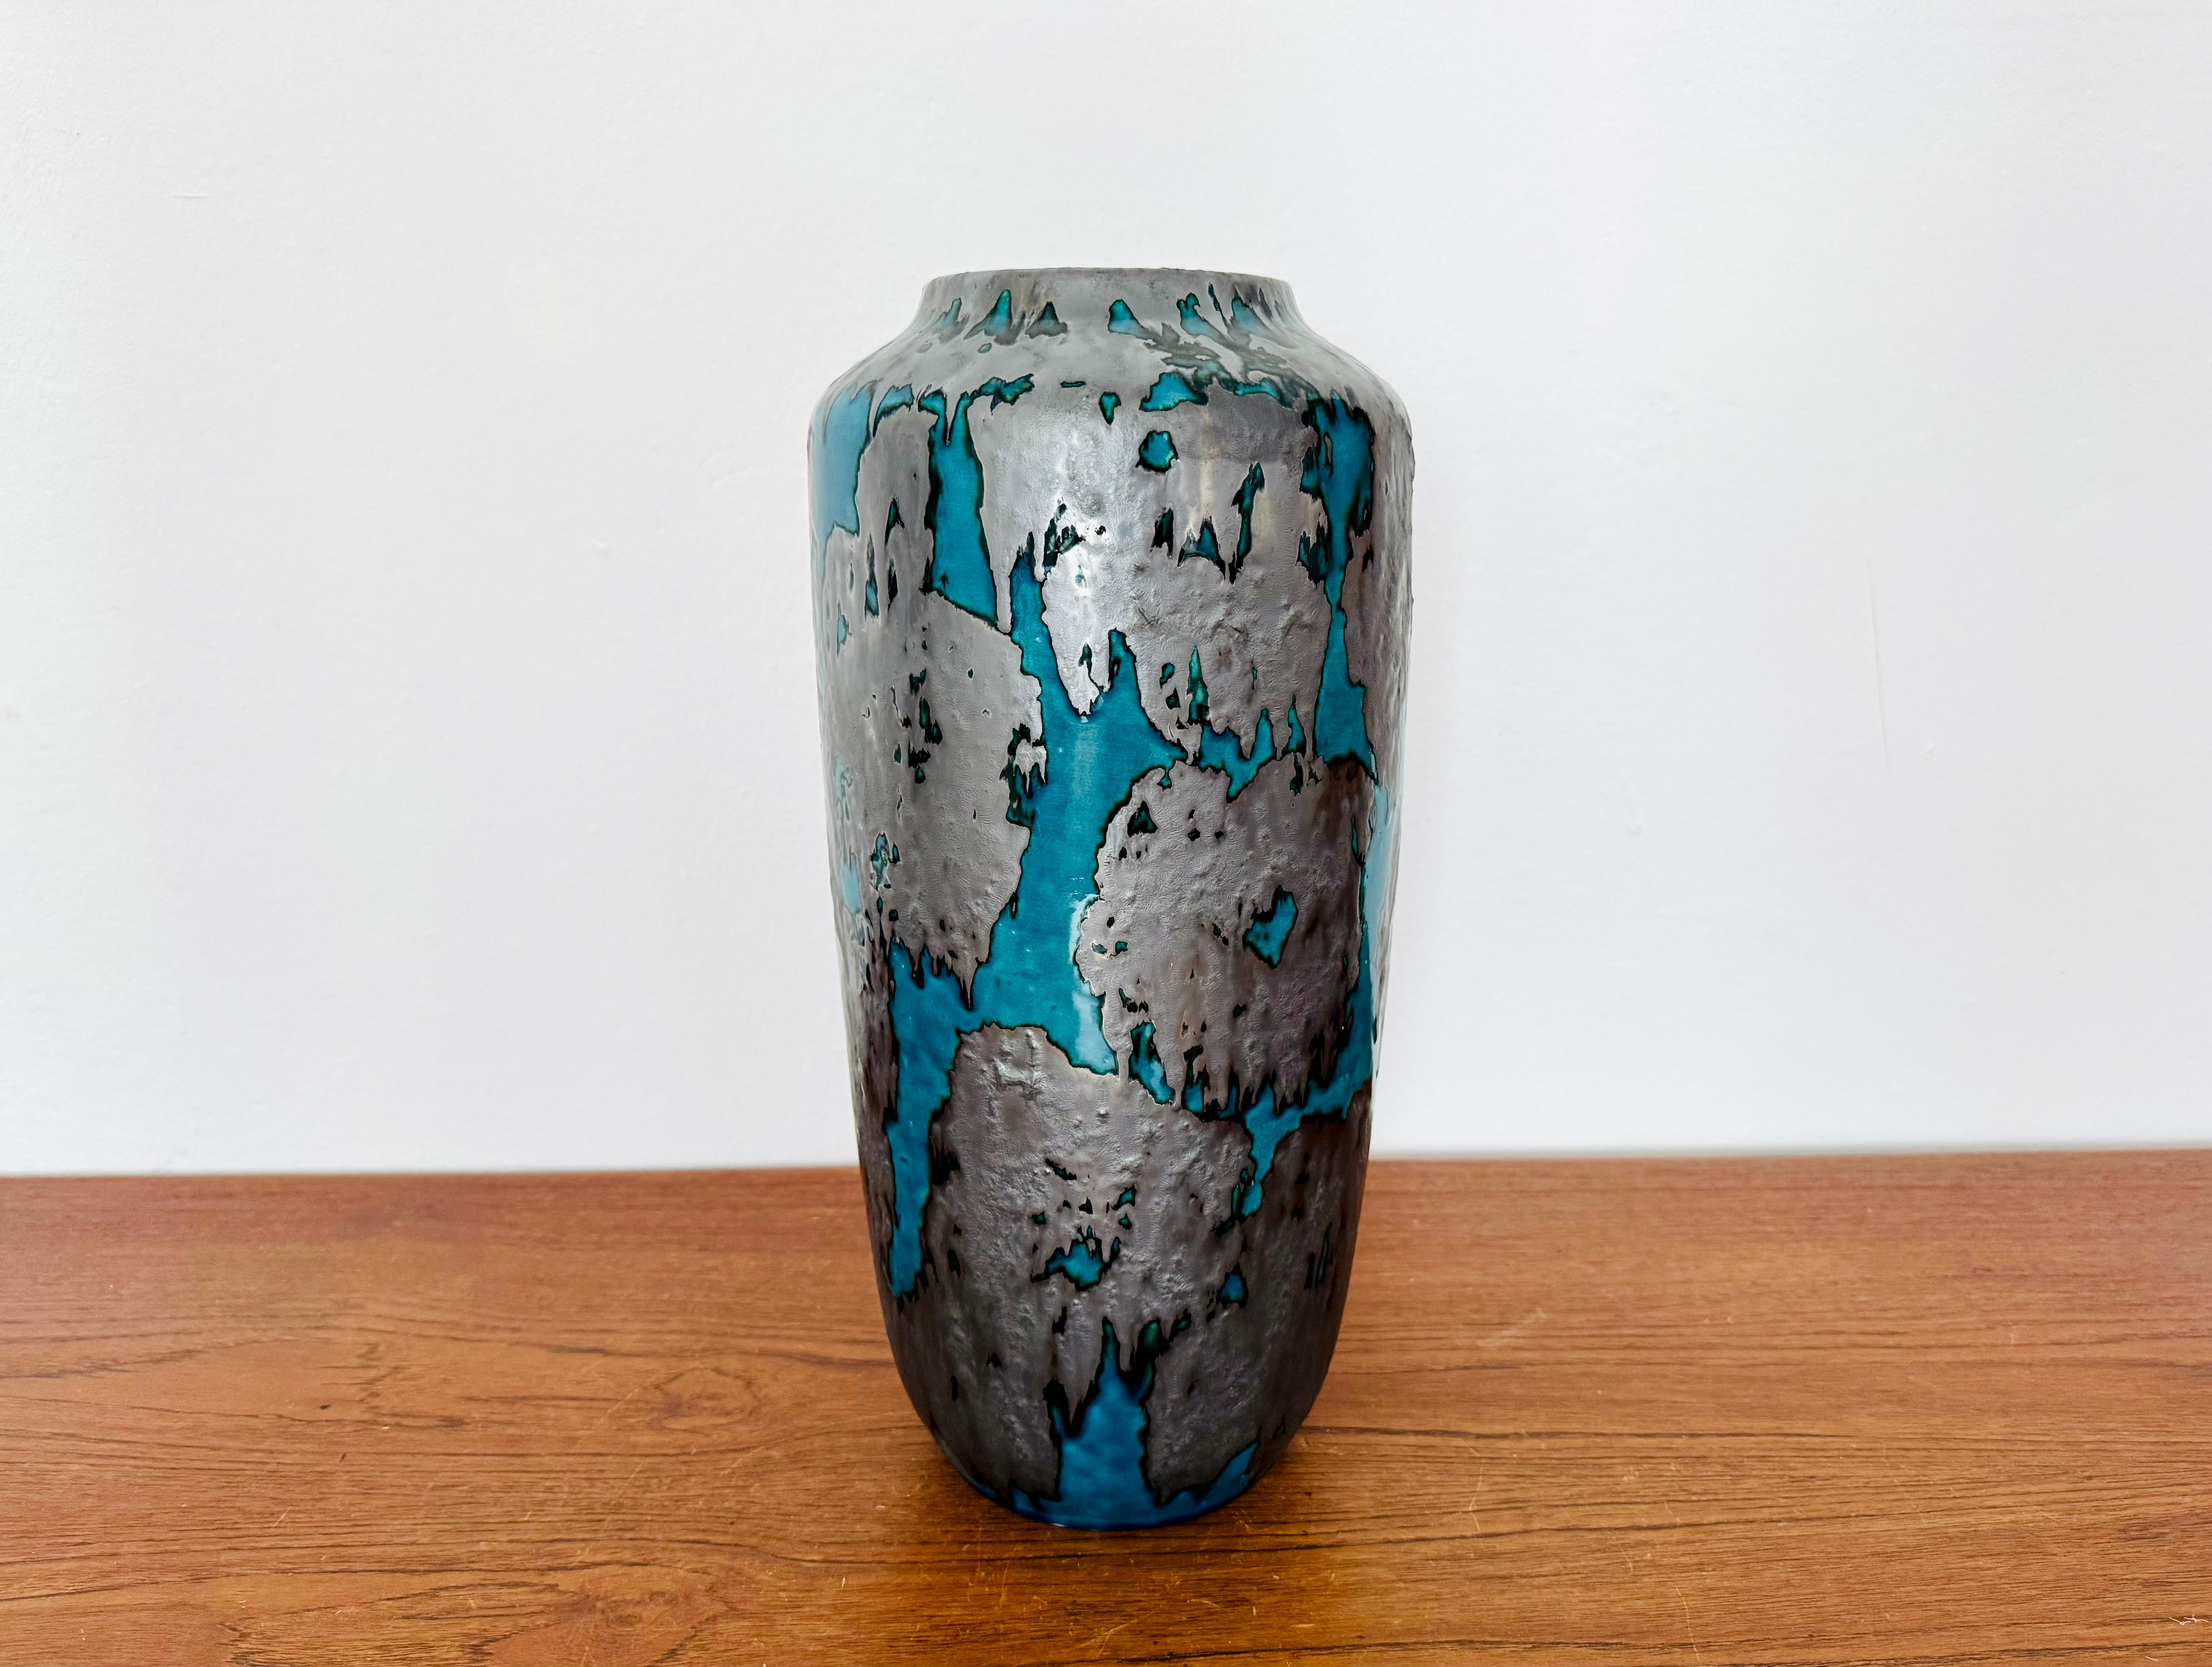 Very beautiful and unusual ceramic floor vase from the 1960s.
The color combination with the blue-green and silver-black glaze is particularly successful.
Wonderful design and a special ceramic object for collectors.

Condition:

Very good vintage